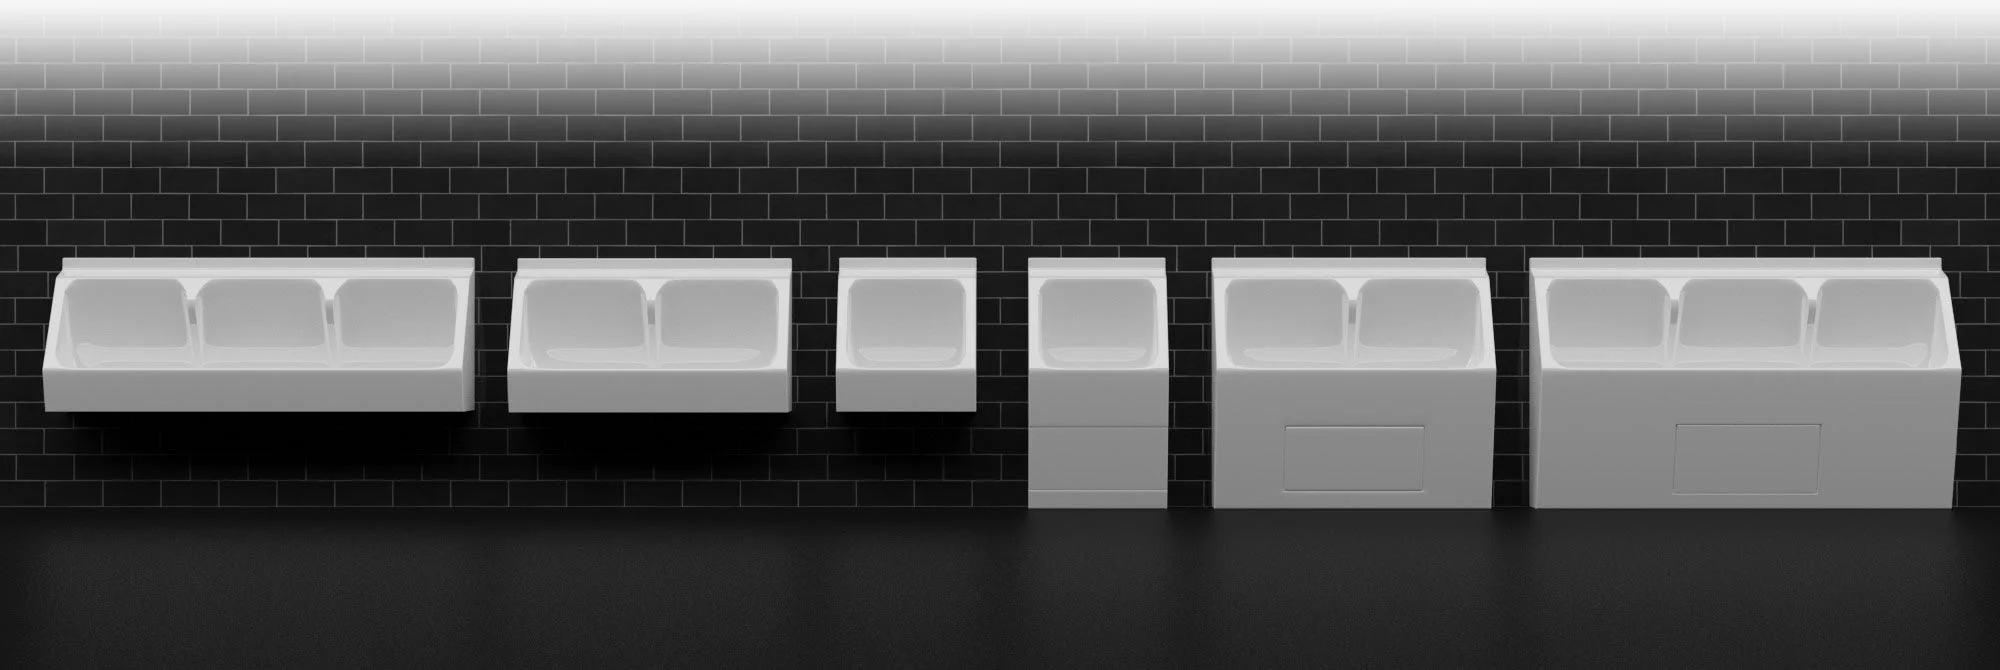 A selection of GRP urinal troughs in varying sizes fixed to dark coloured tiled wall in a washroom